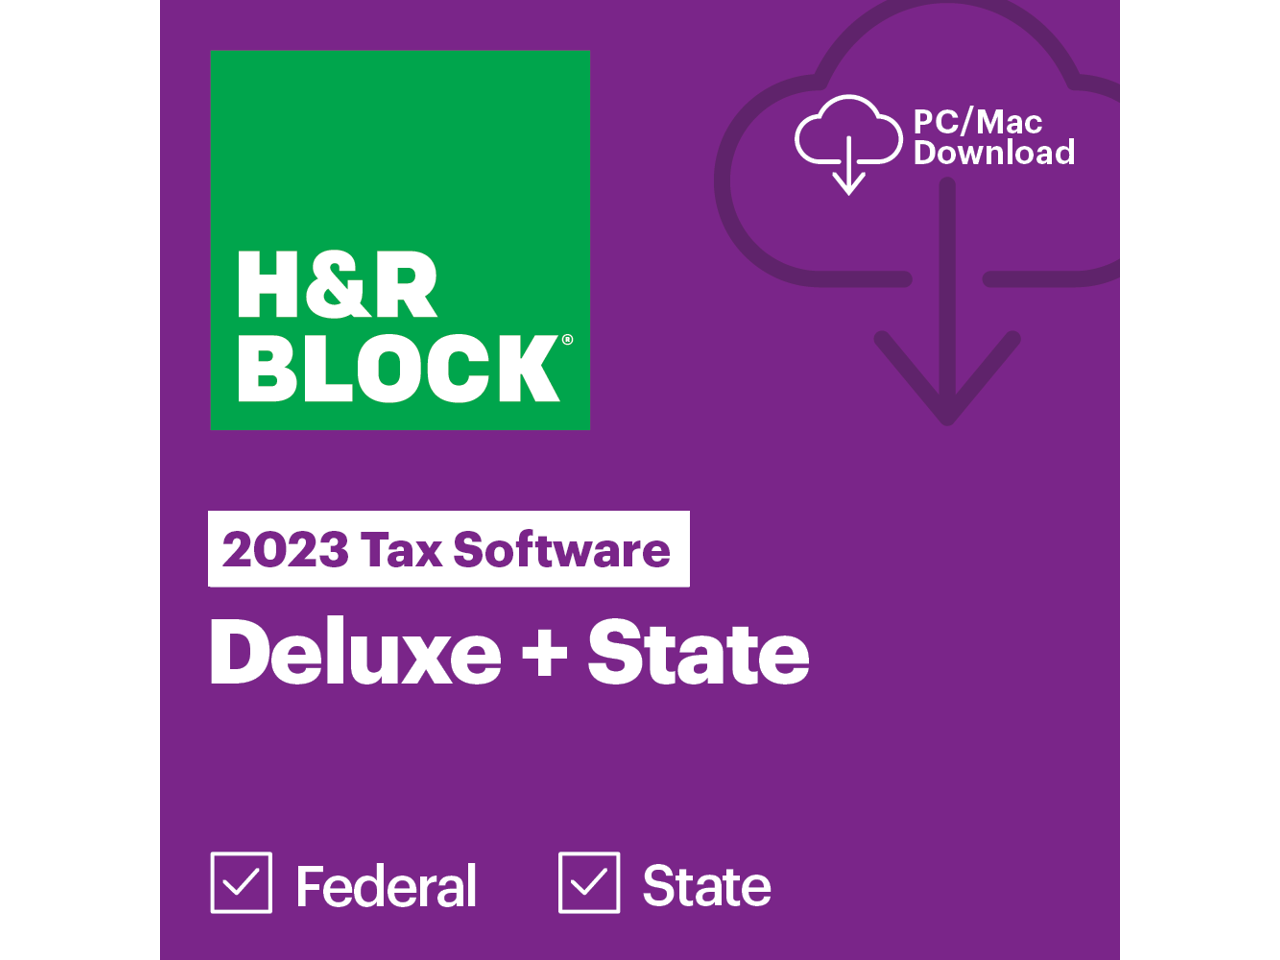 H&R Block 2023 Deluxe + State Tax Software + ESET NOD32 Antivirus 2024 - 1 Device / 1 Year - Download $19.99 & More